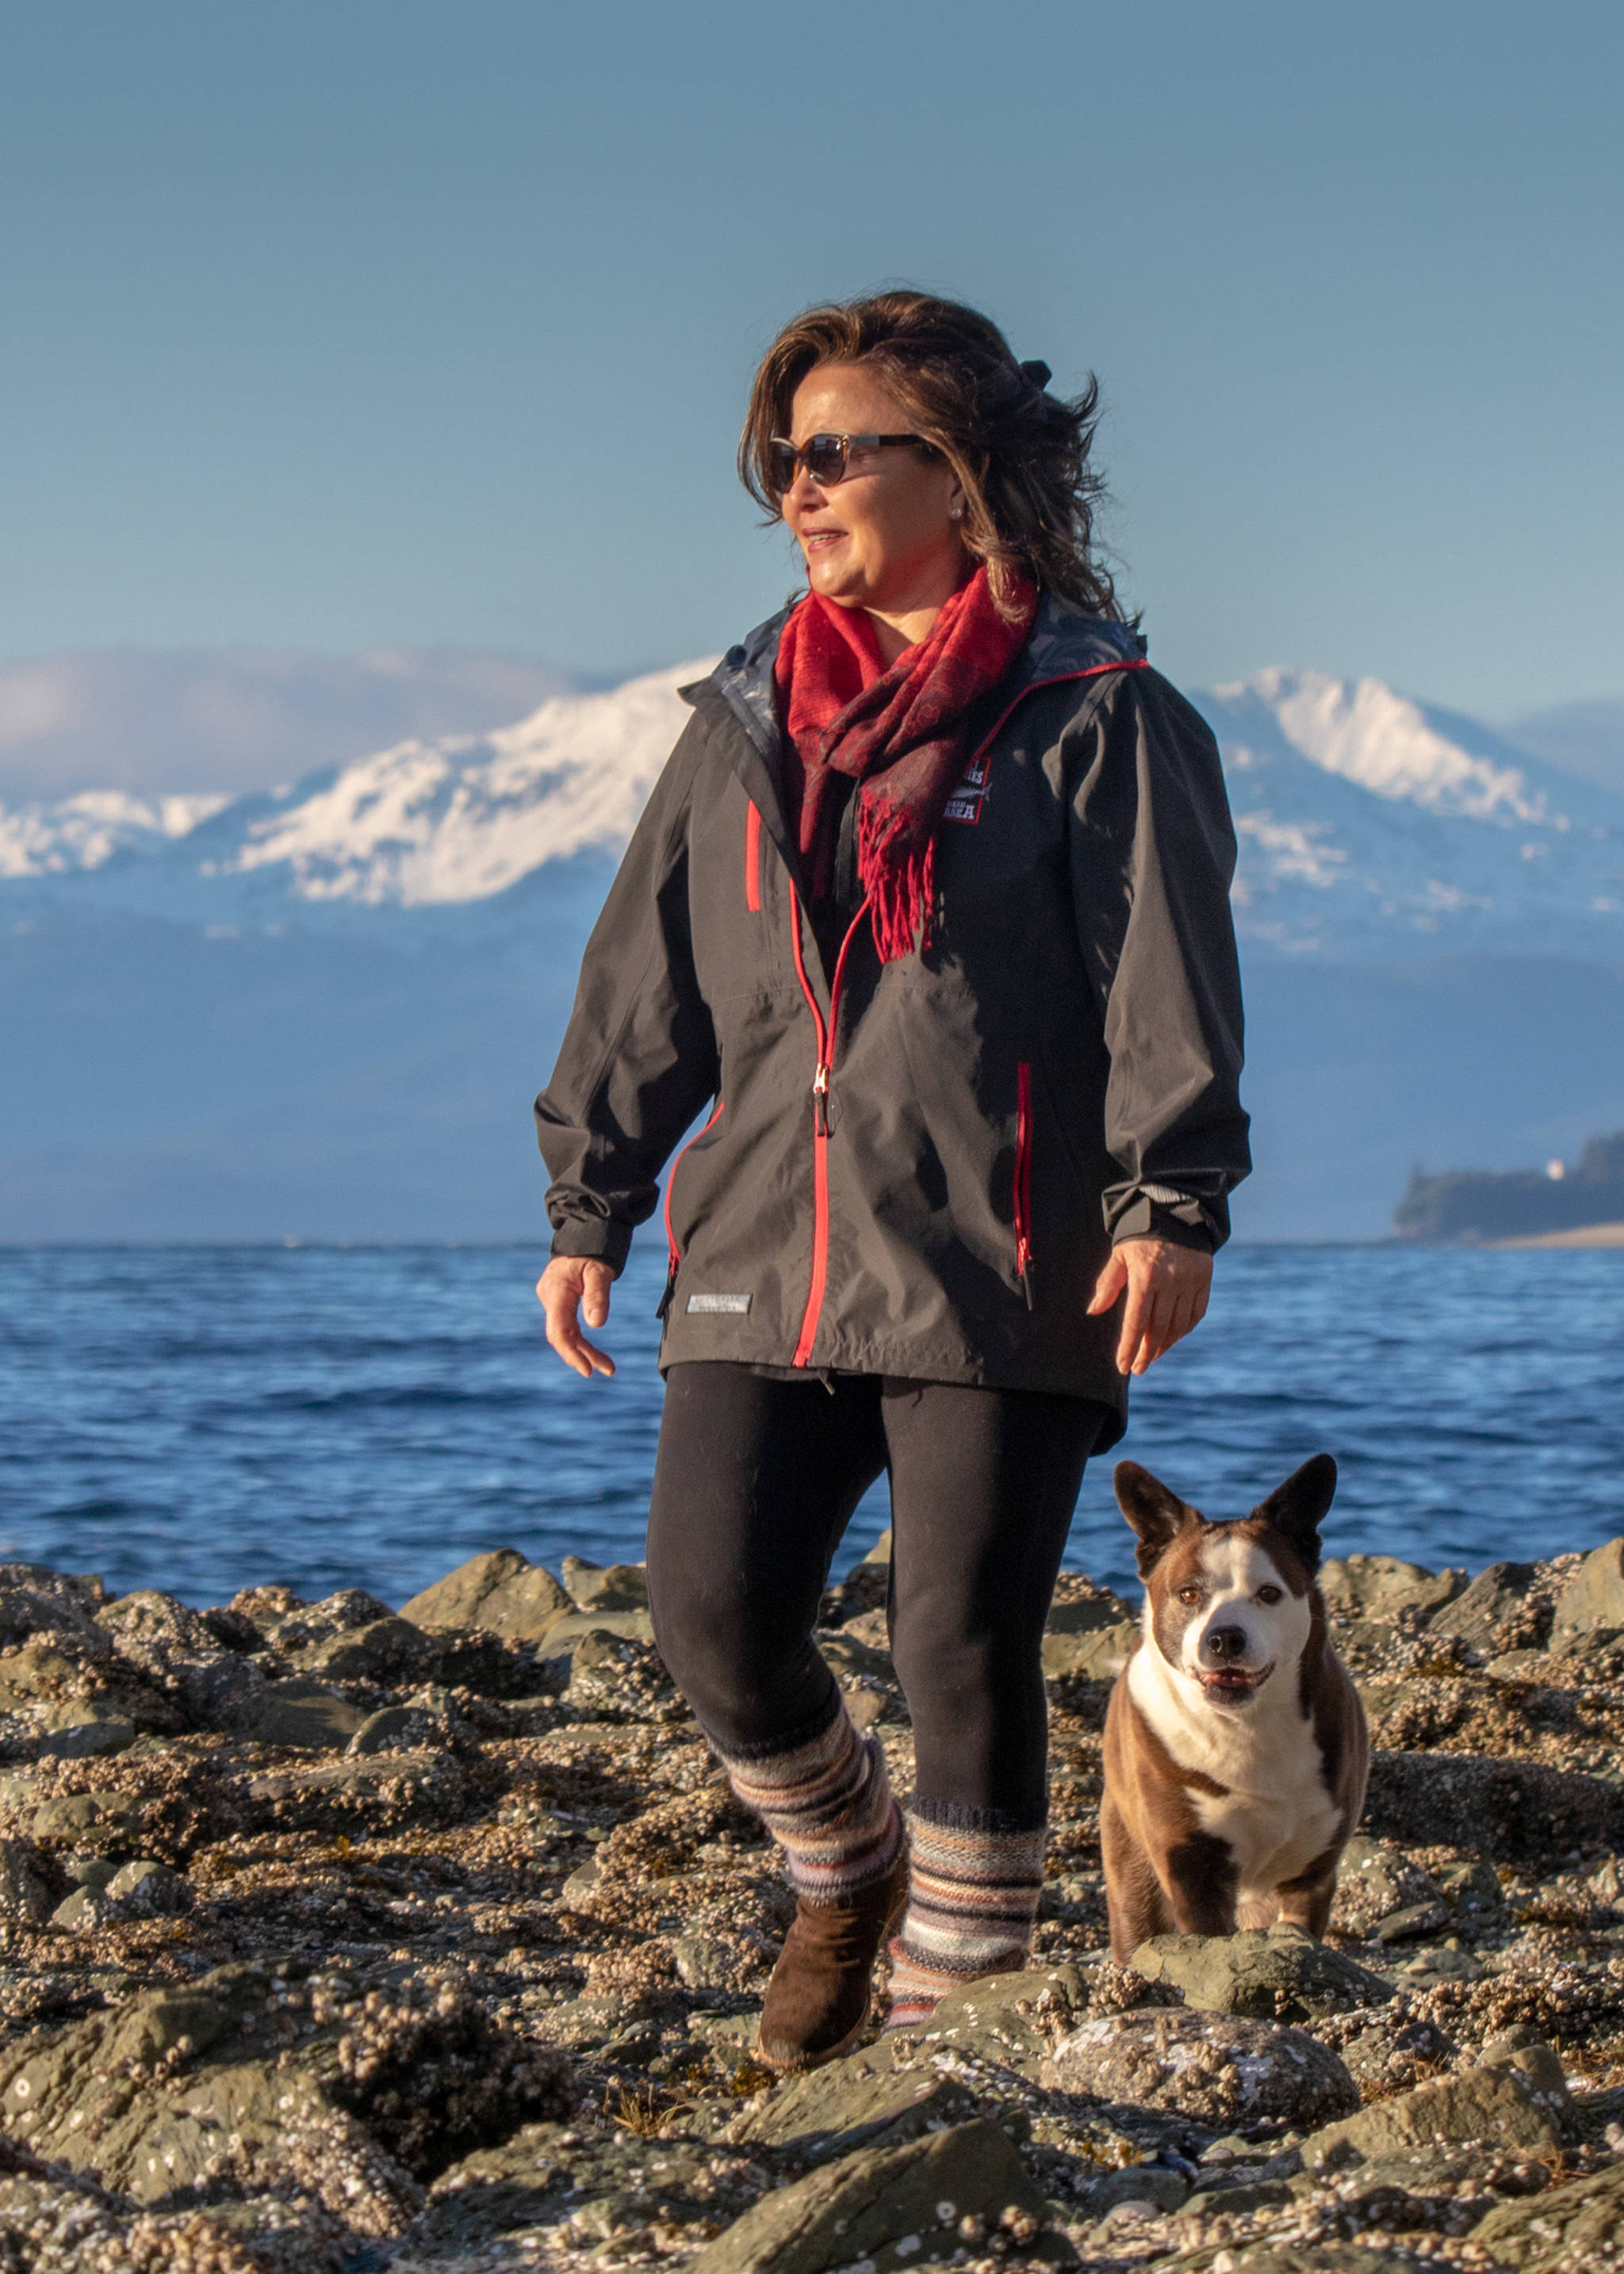 Dec. 2, 2018: There’s nothing better than a sunny day in November. Bonny Millard makes the most of it by taking a walk near Amalga Harbor. She dressed stylish and warm in a jacket from Taku Fisheries, black leggings from Athleta, multi-colored leg warmers, a red scarf and brown suede boots. Her best accessory? Her 13-year-old rescue dog McKenzie, who goes perfectly with everything she wears.